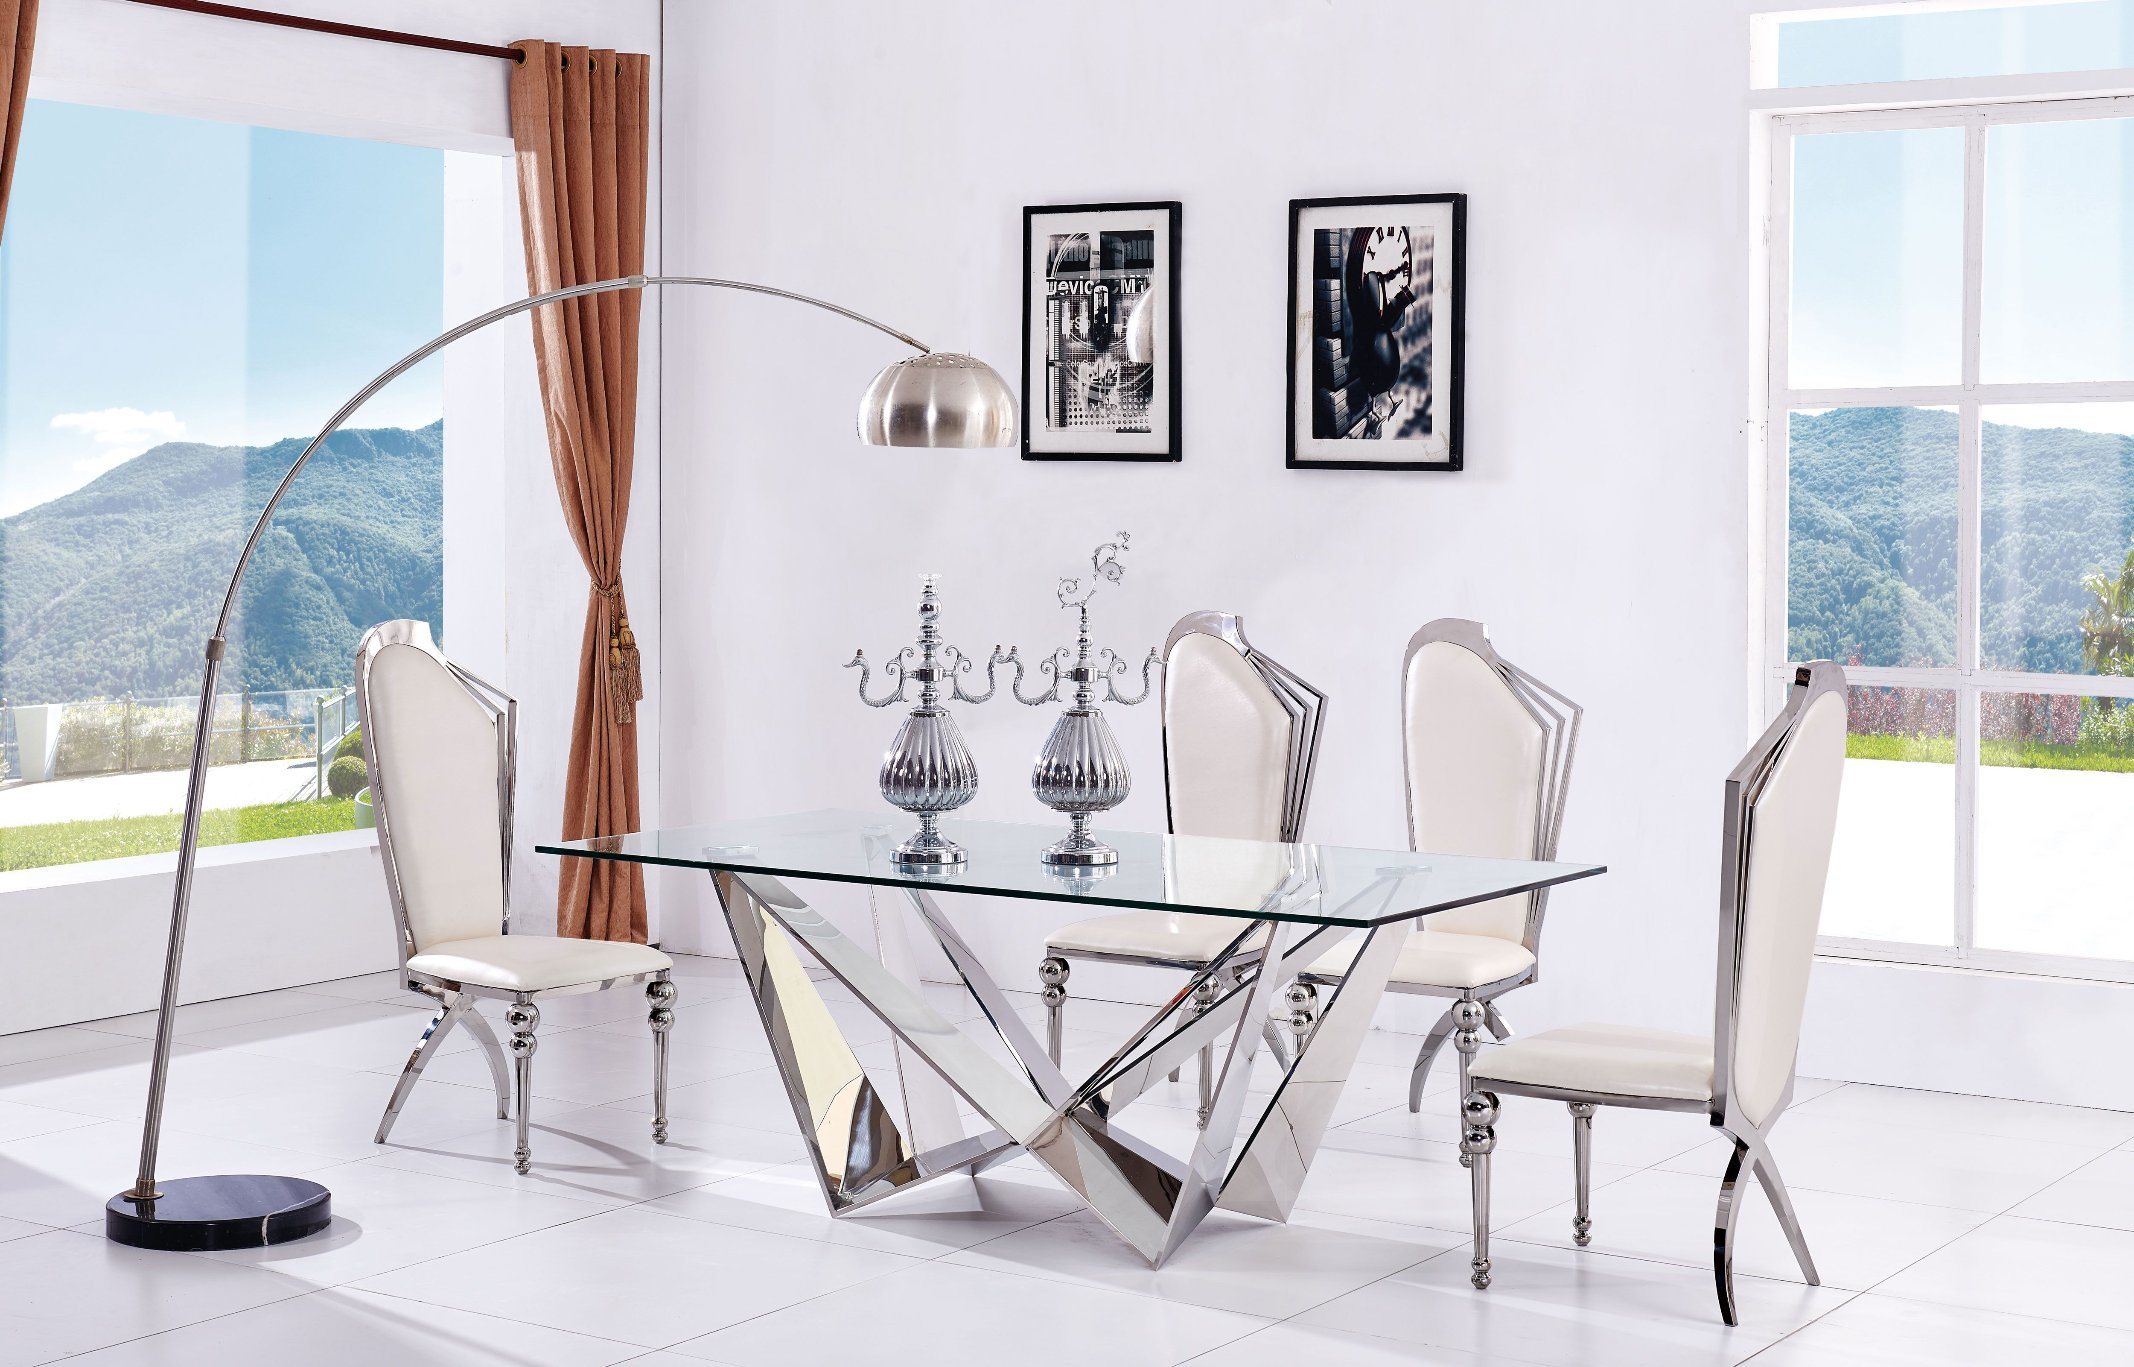 Glass Dining Table for Living Room Furniture